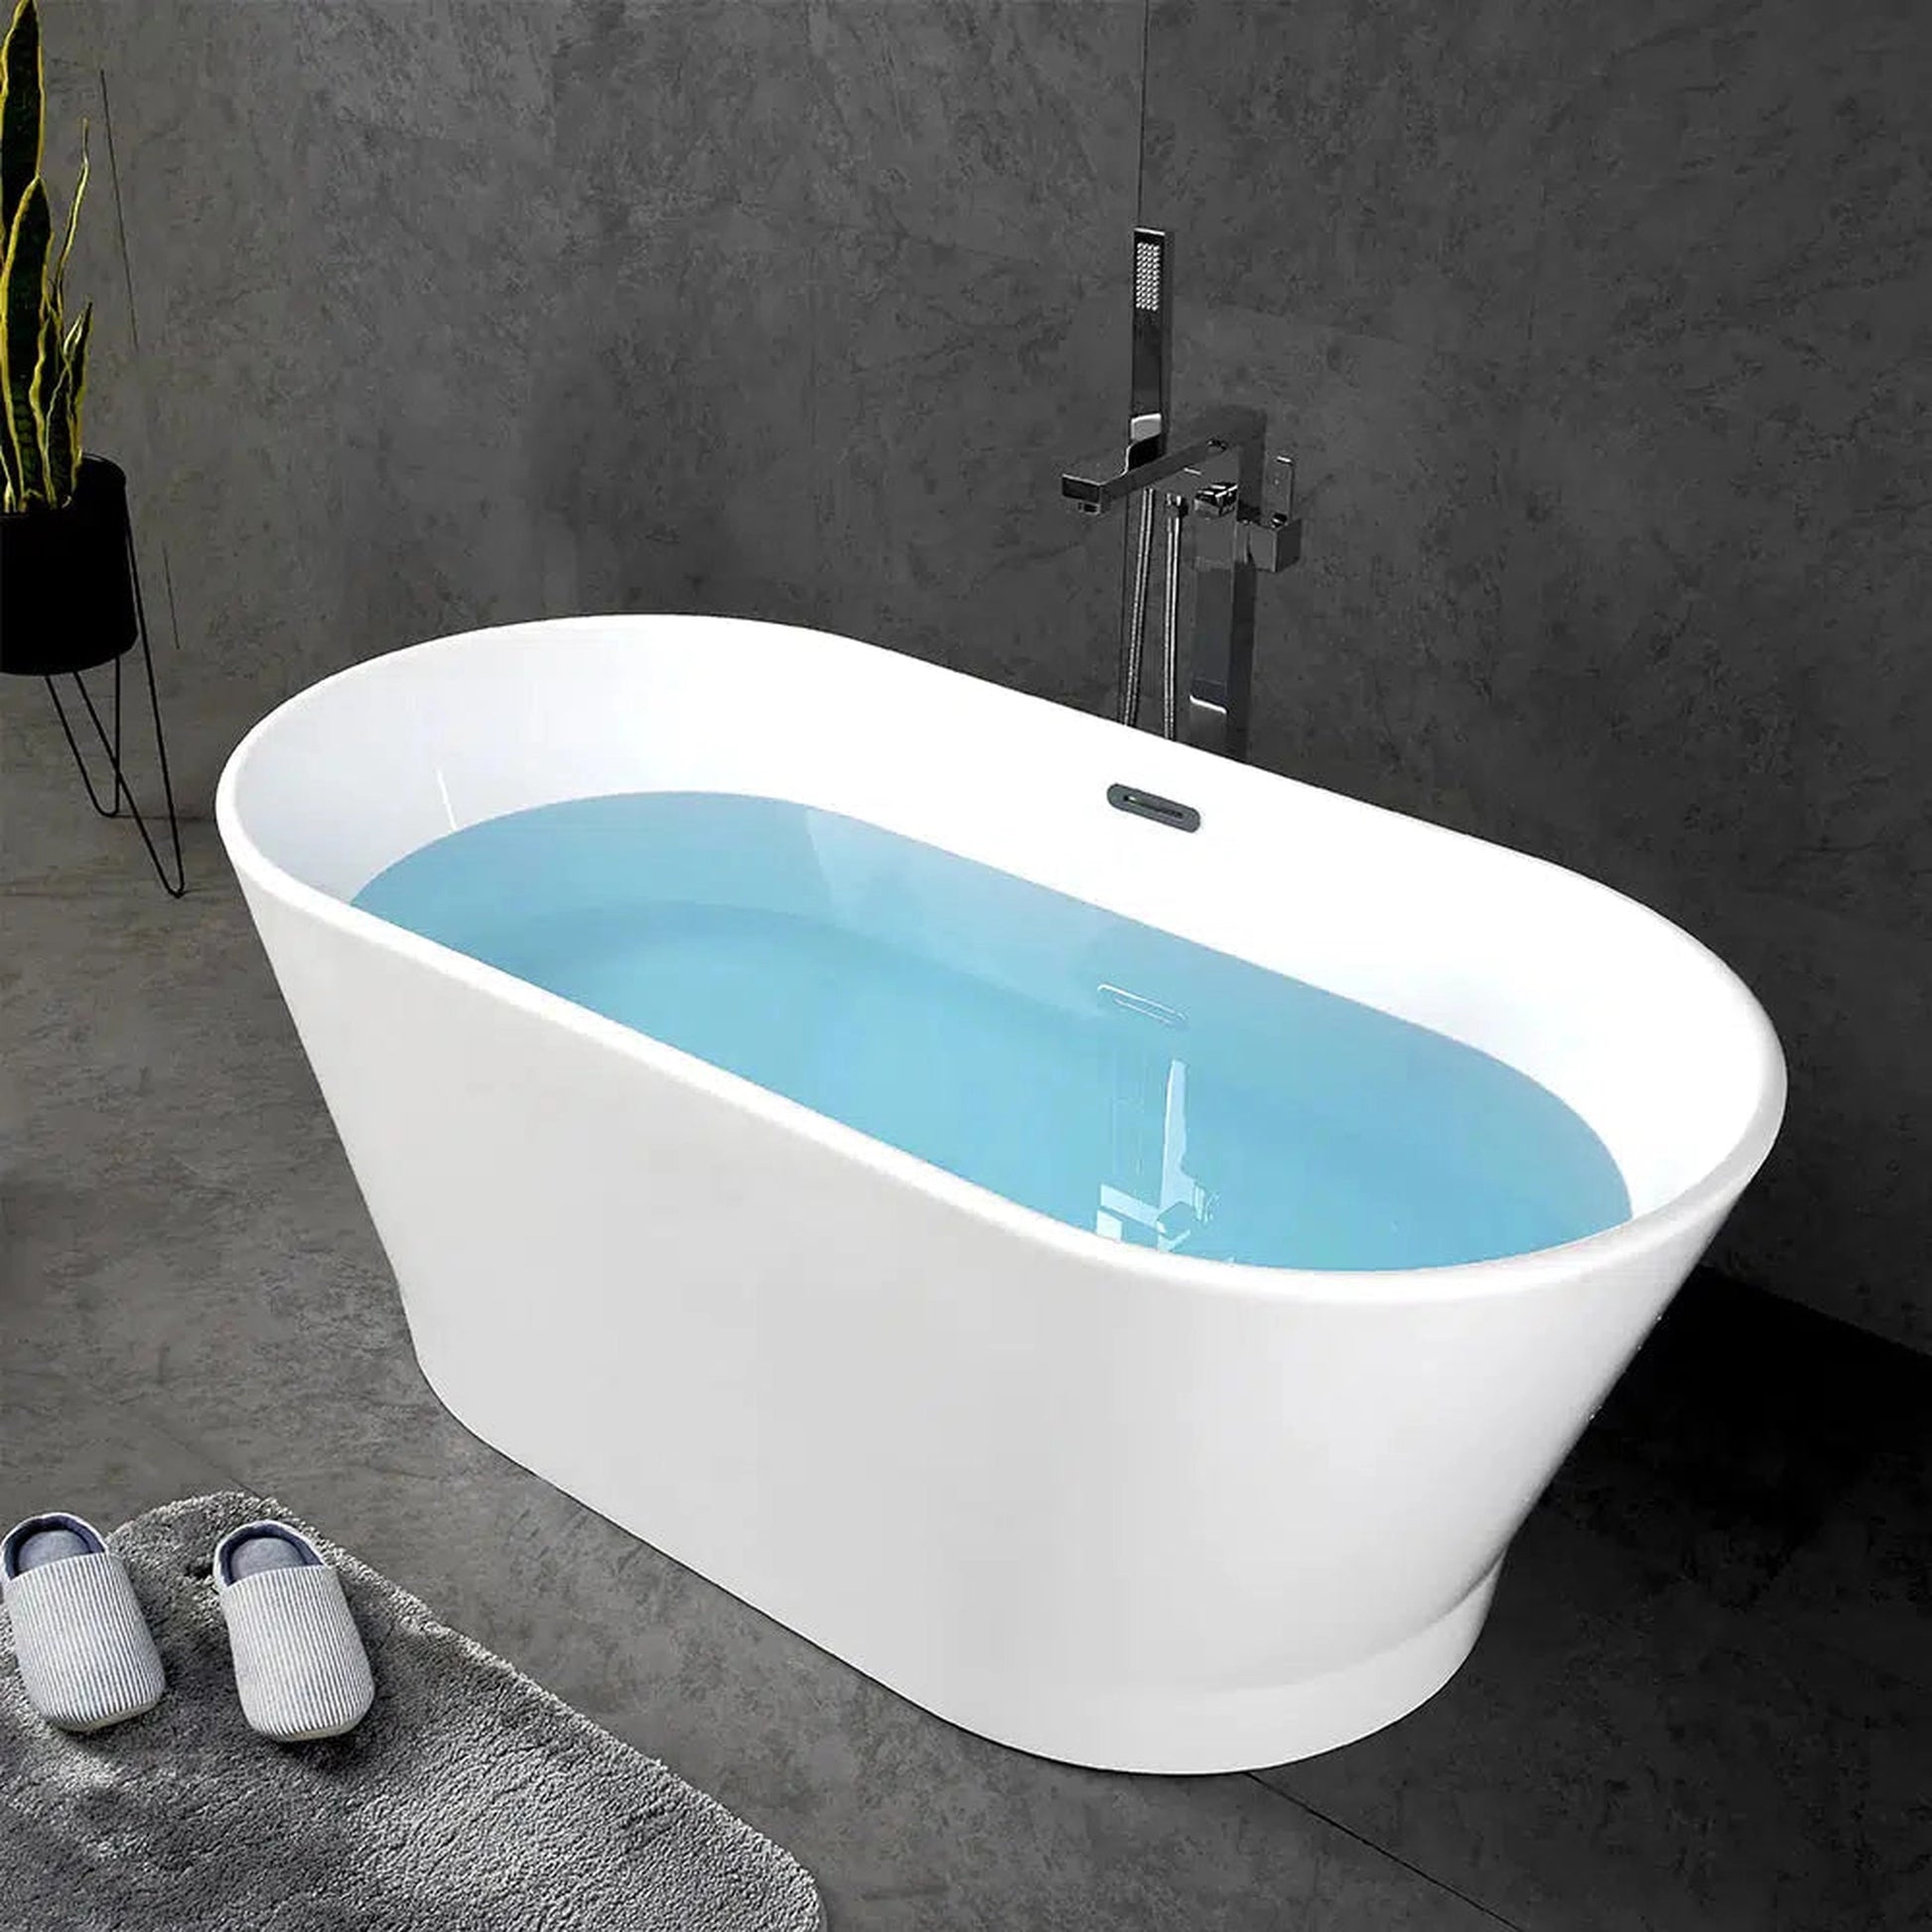 TONA Princess 67" White Oval Acrylic Freestanding Bathtub With Chrome-Plated Drain Cover & Overflow Cover